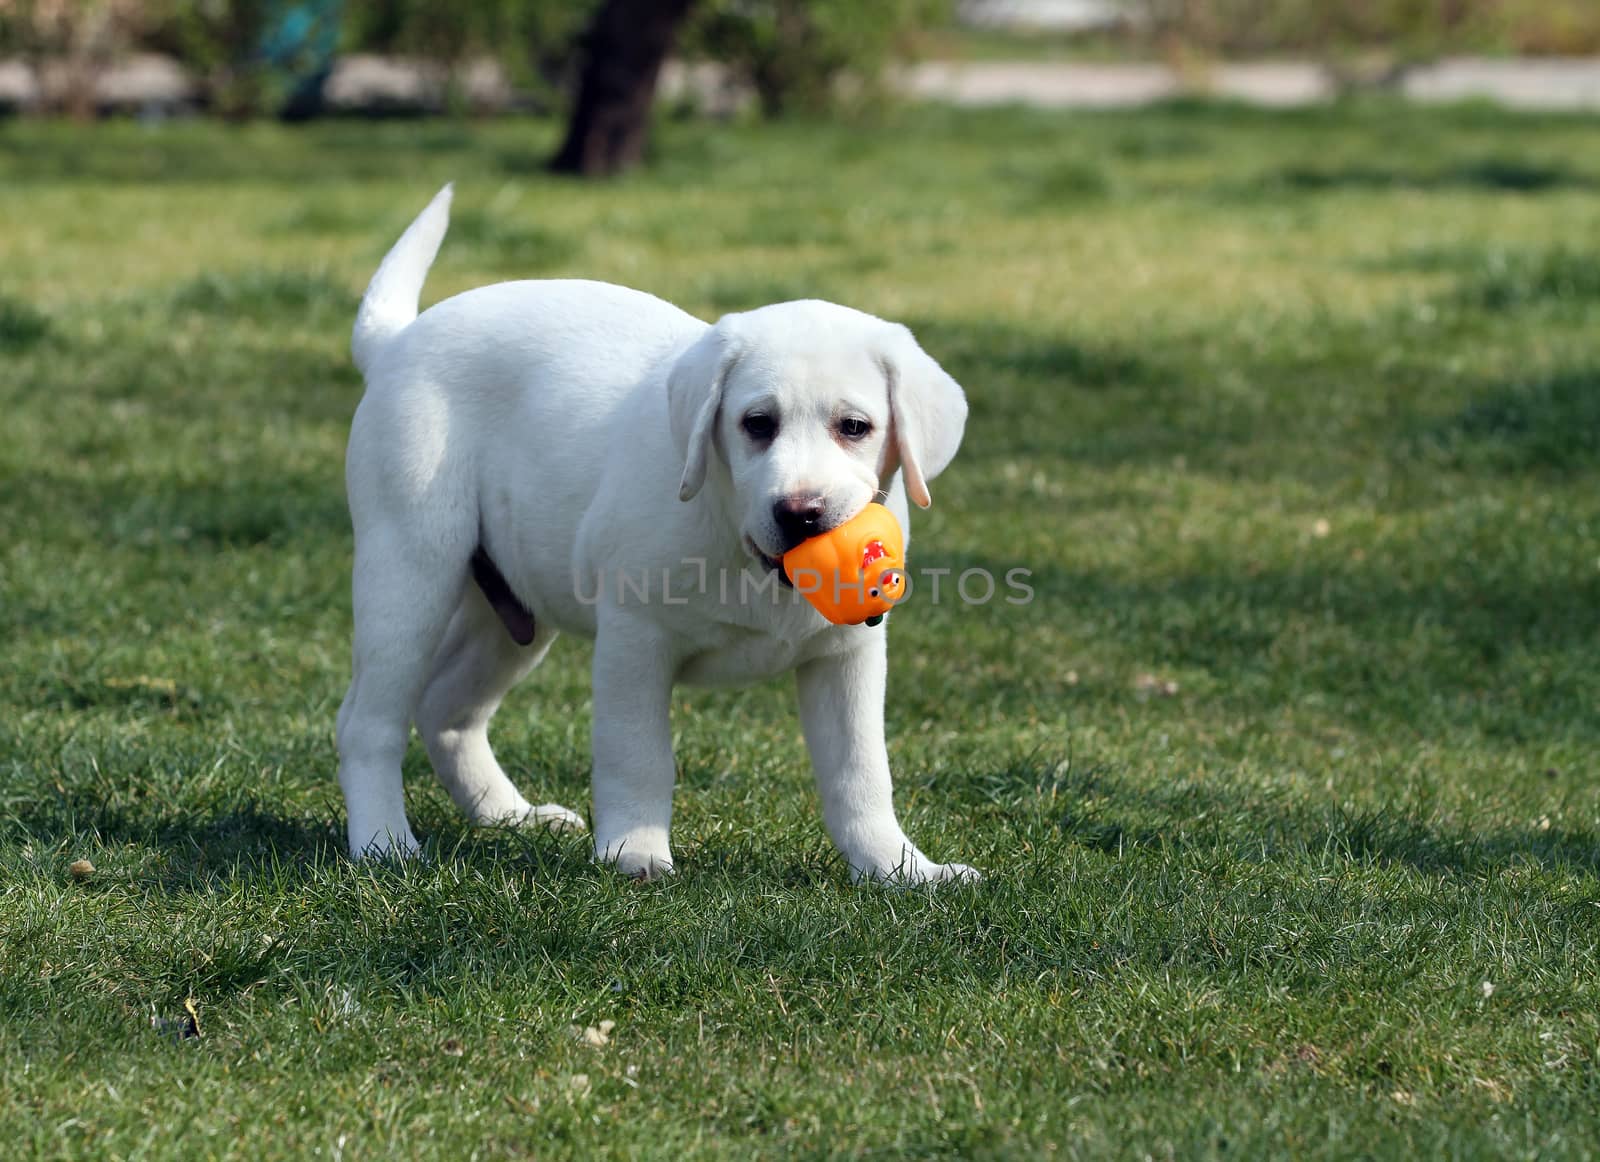 the nice yellow labrador playing in the park